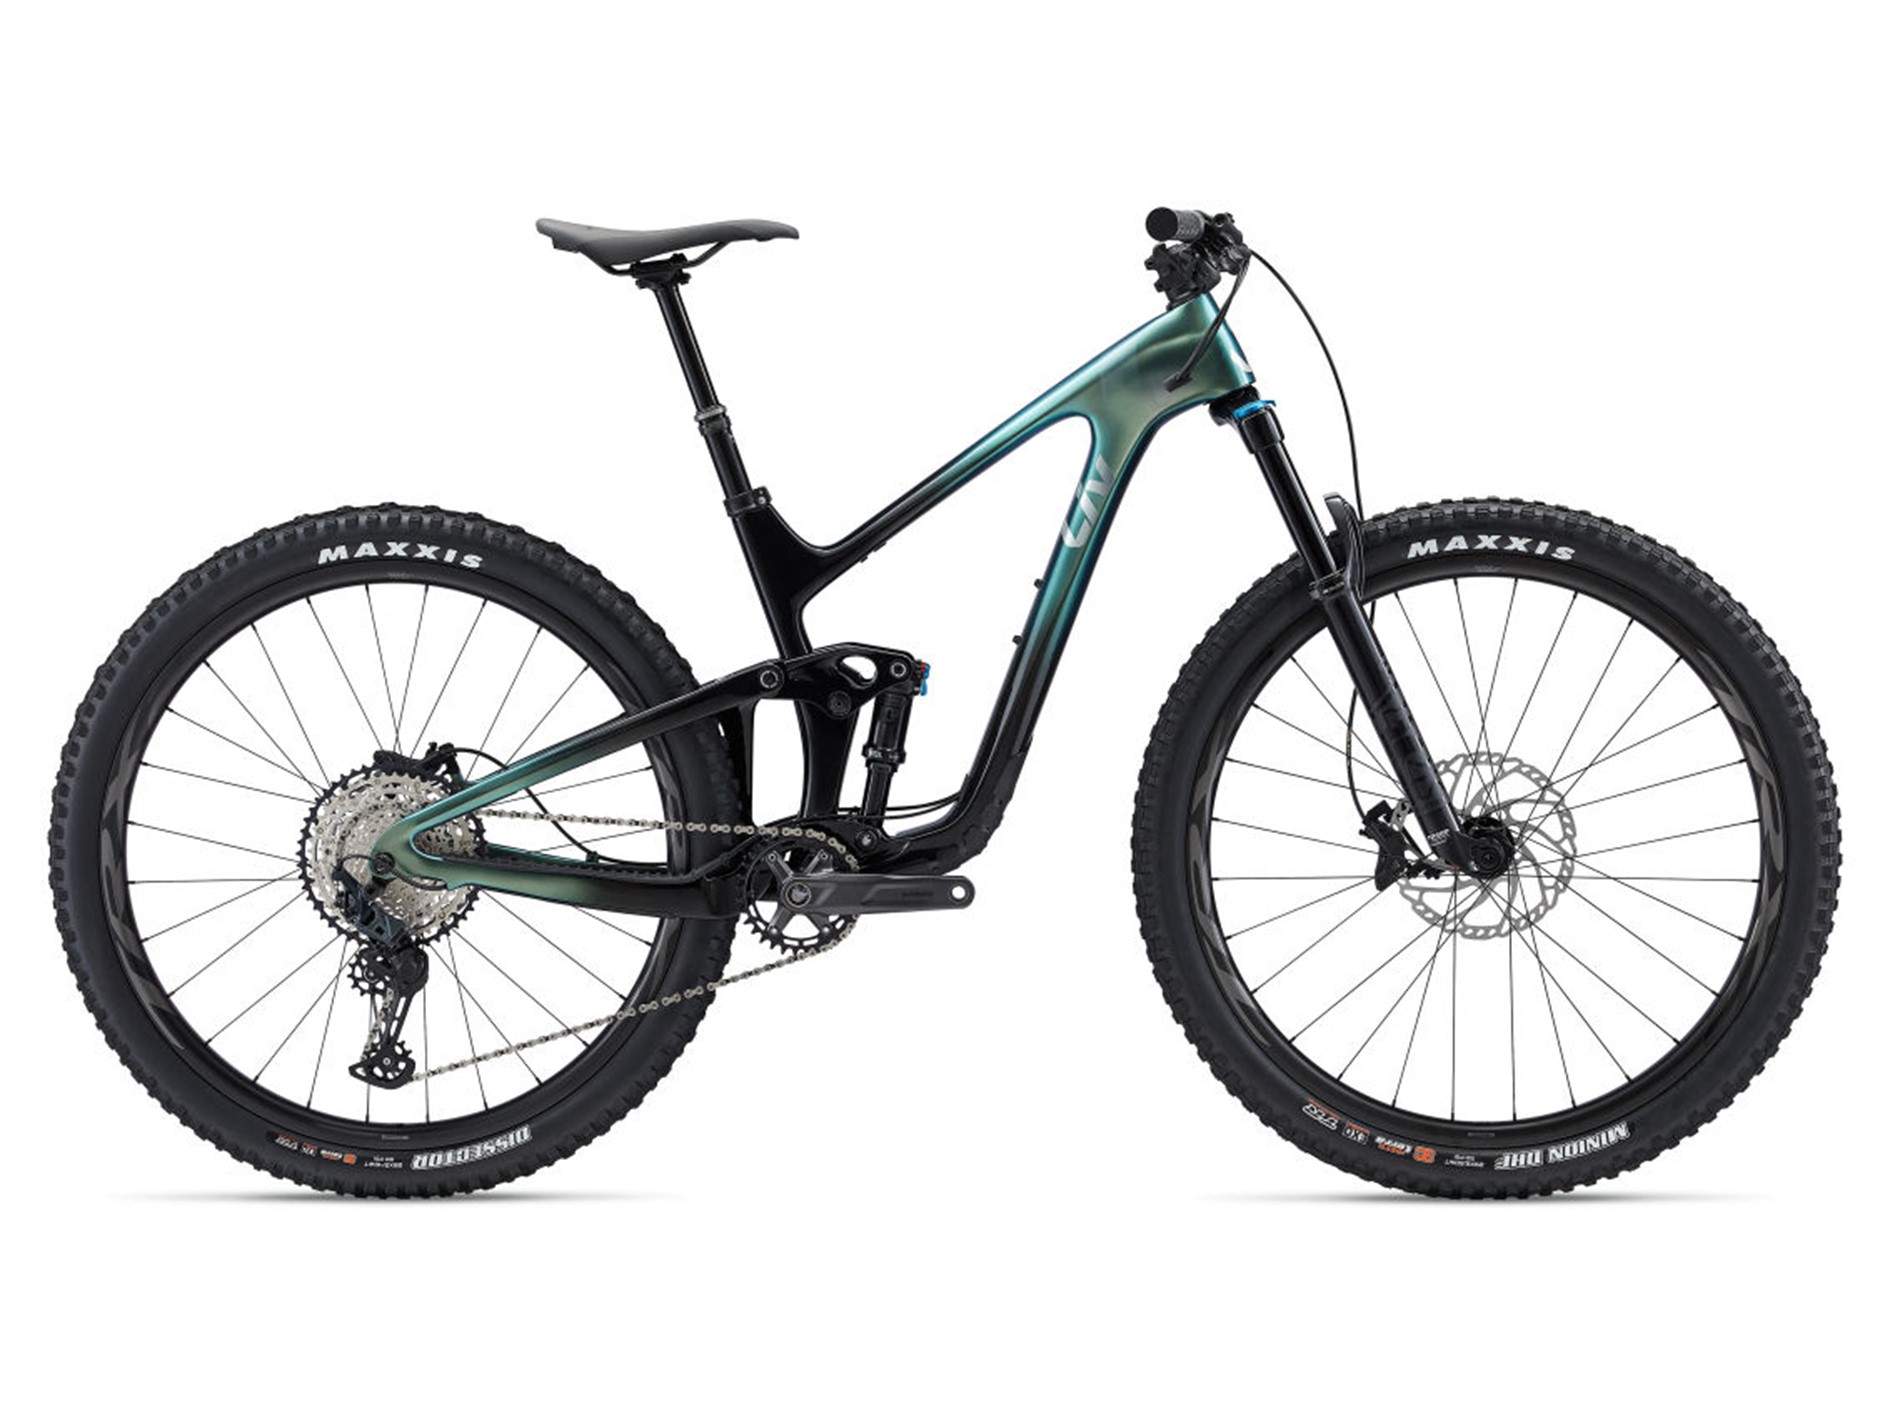 Intrigue Advanced Pro 2022 Frontansicht in der Farbe Fanatic Teal